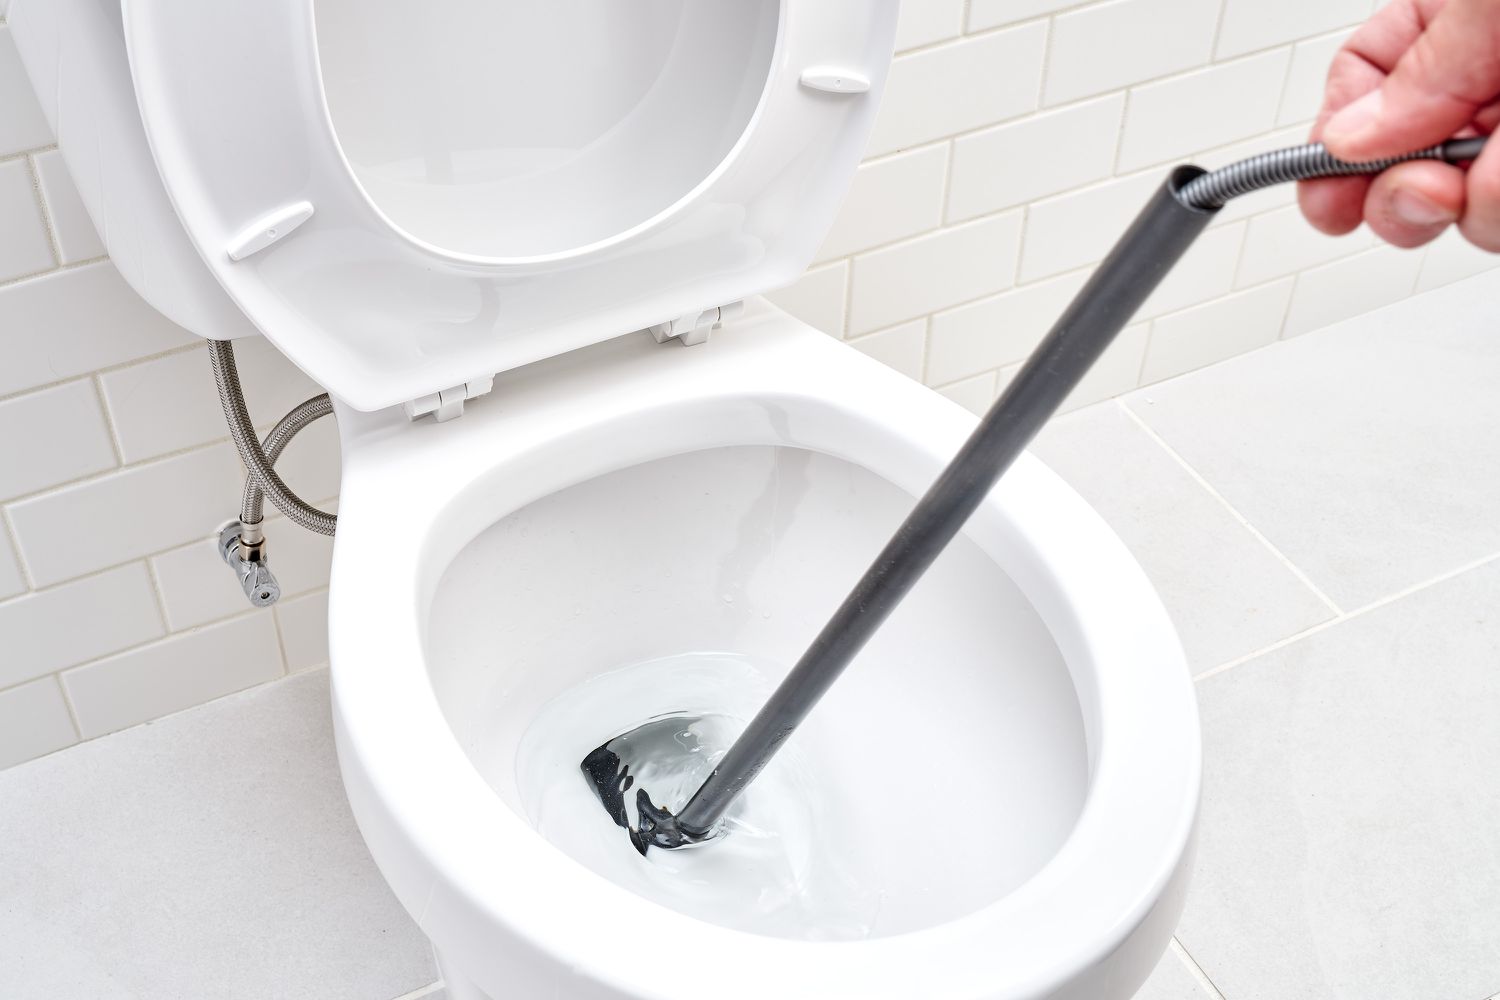 https://storables.com/wp-content/uploads/2023/09/how-to-use-plumbing-snake-in-toilet-1695712571.jpeg